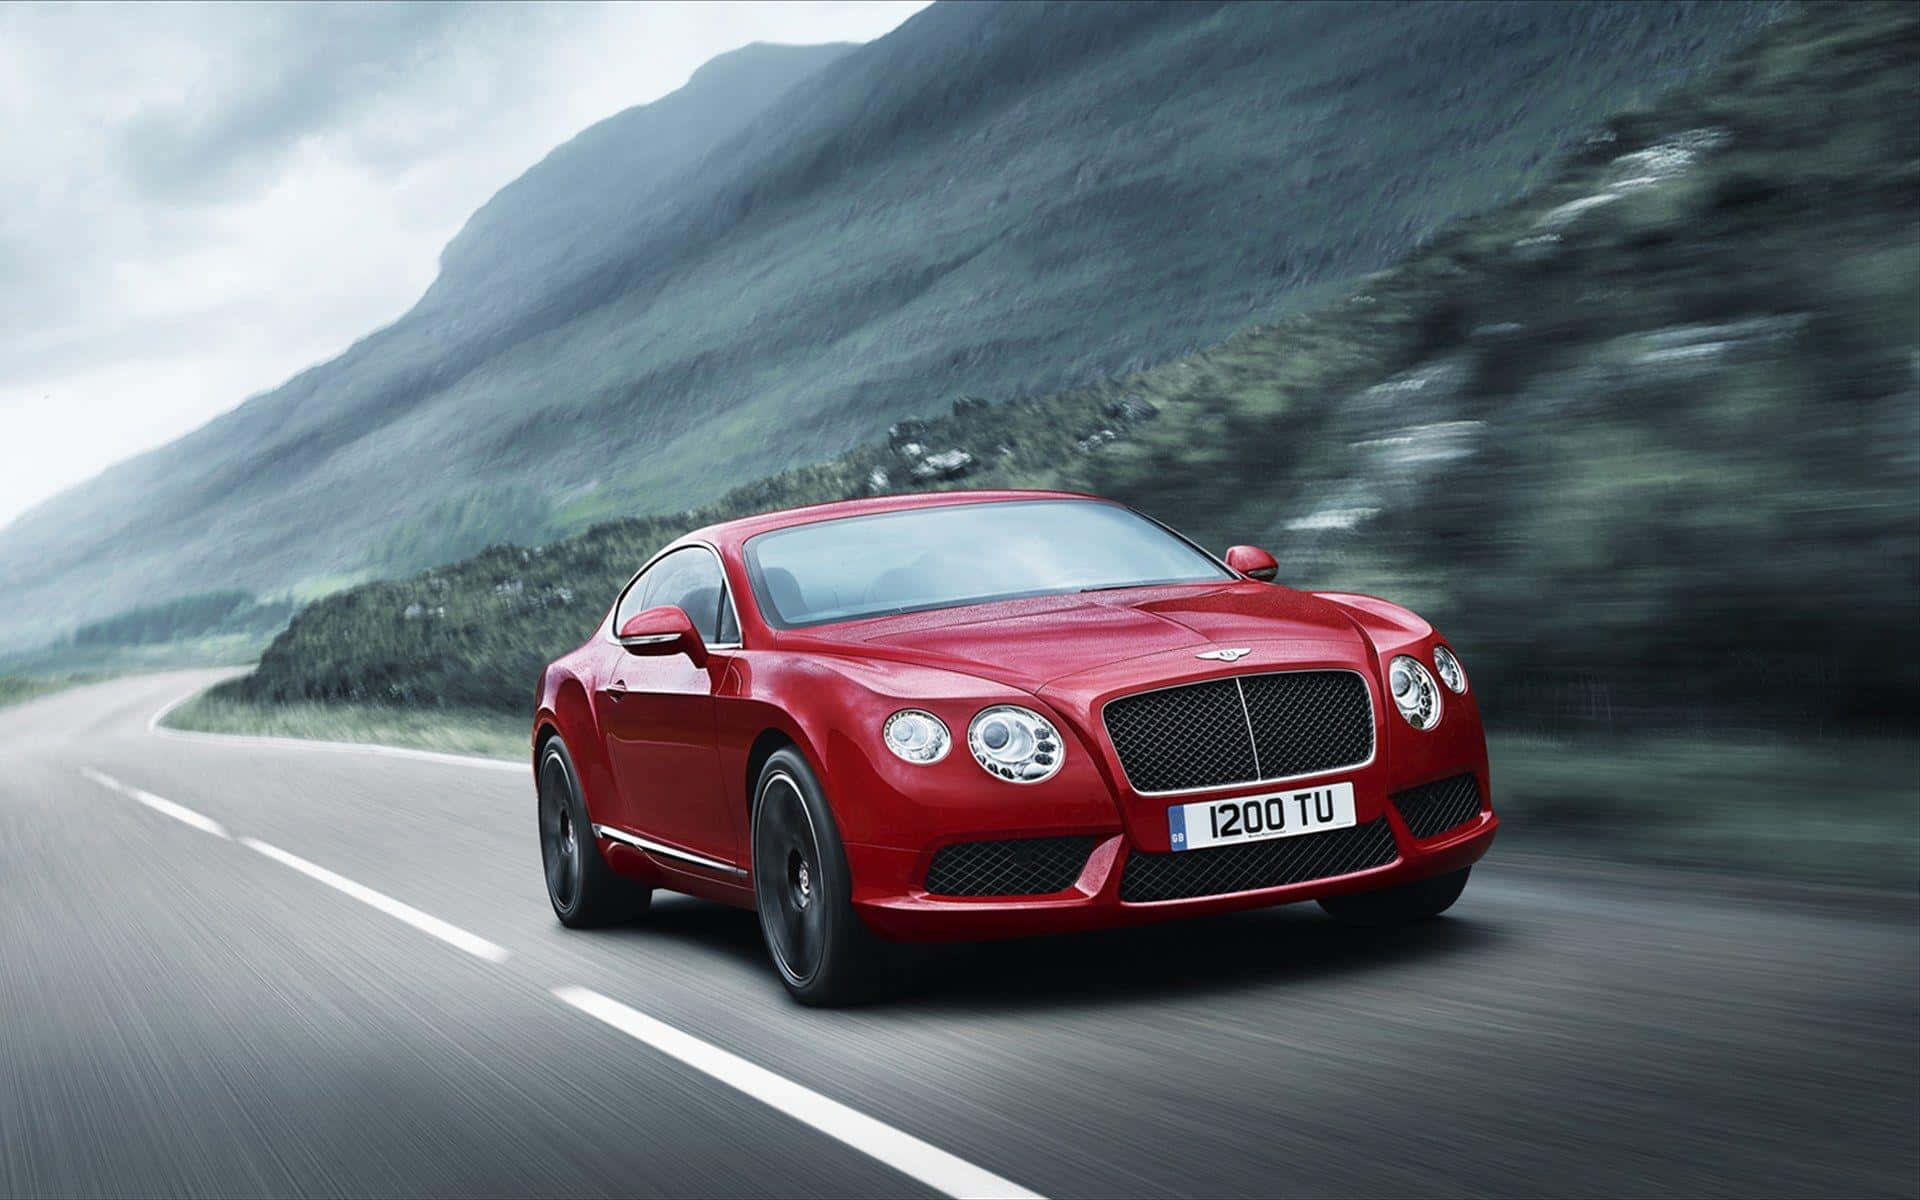 Experience Driving at its Finest in a Bentley Sport Wallpaper